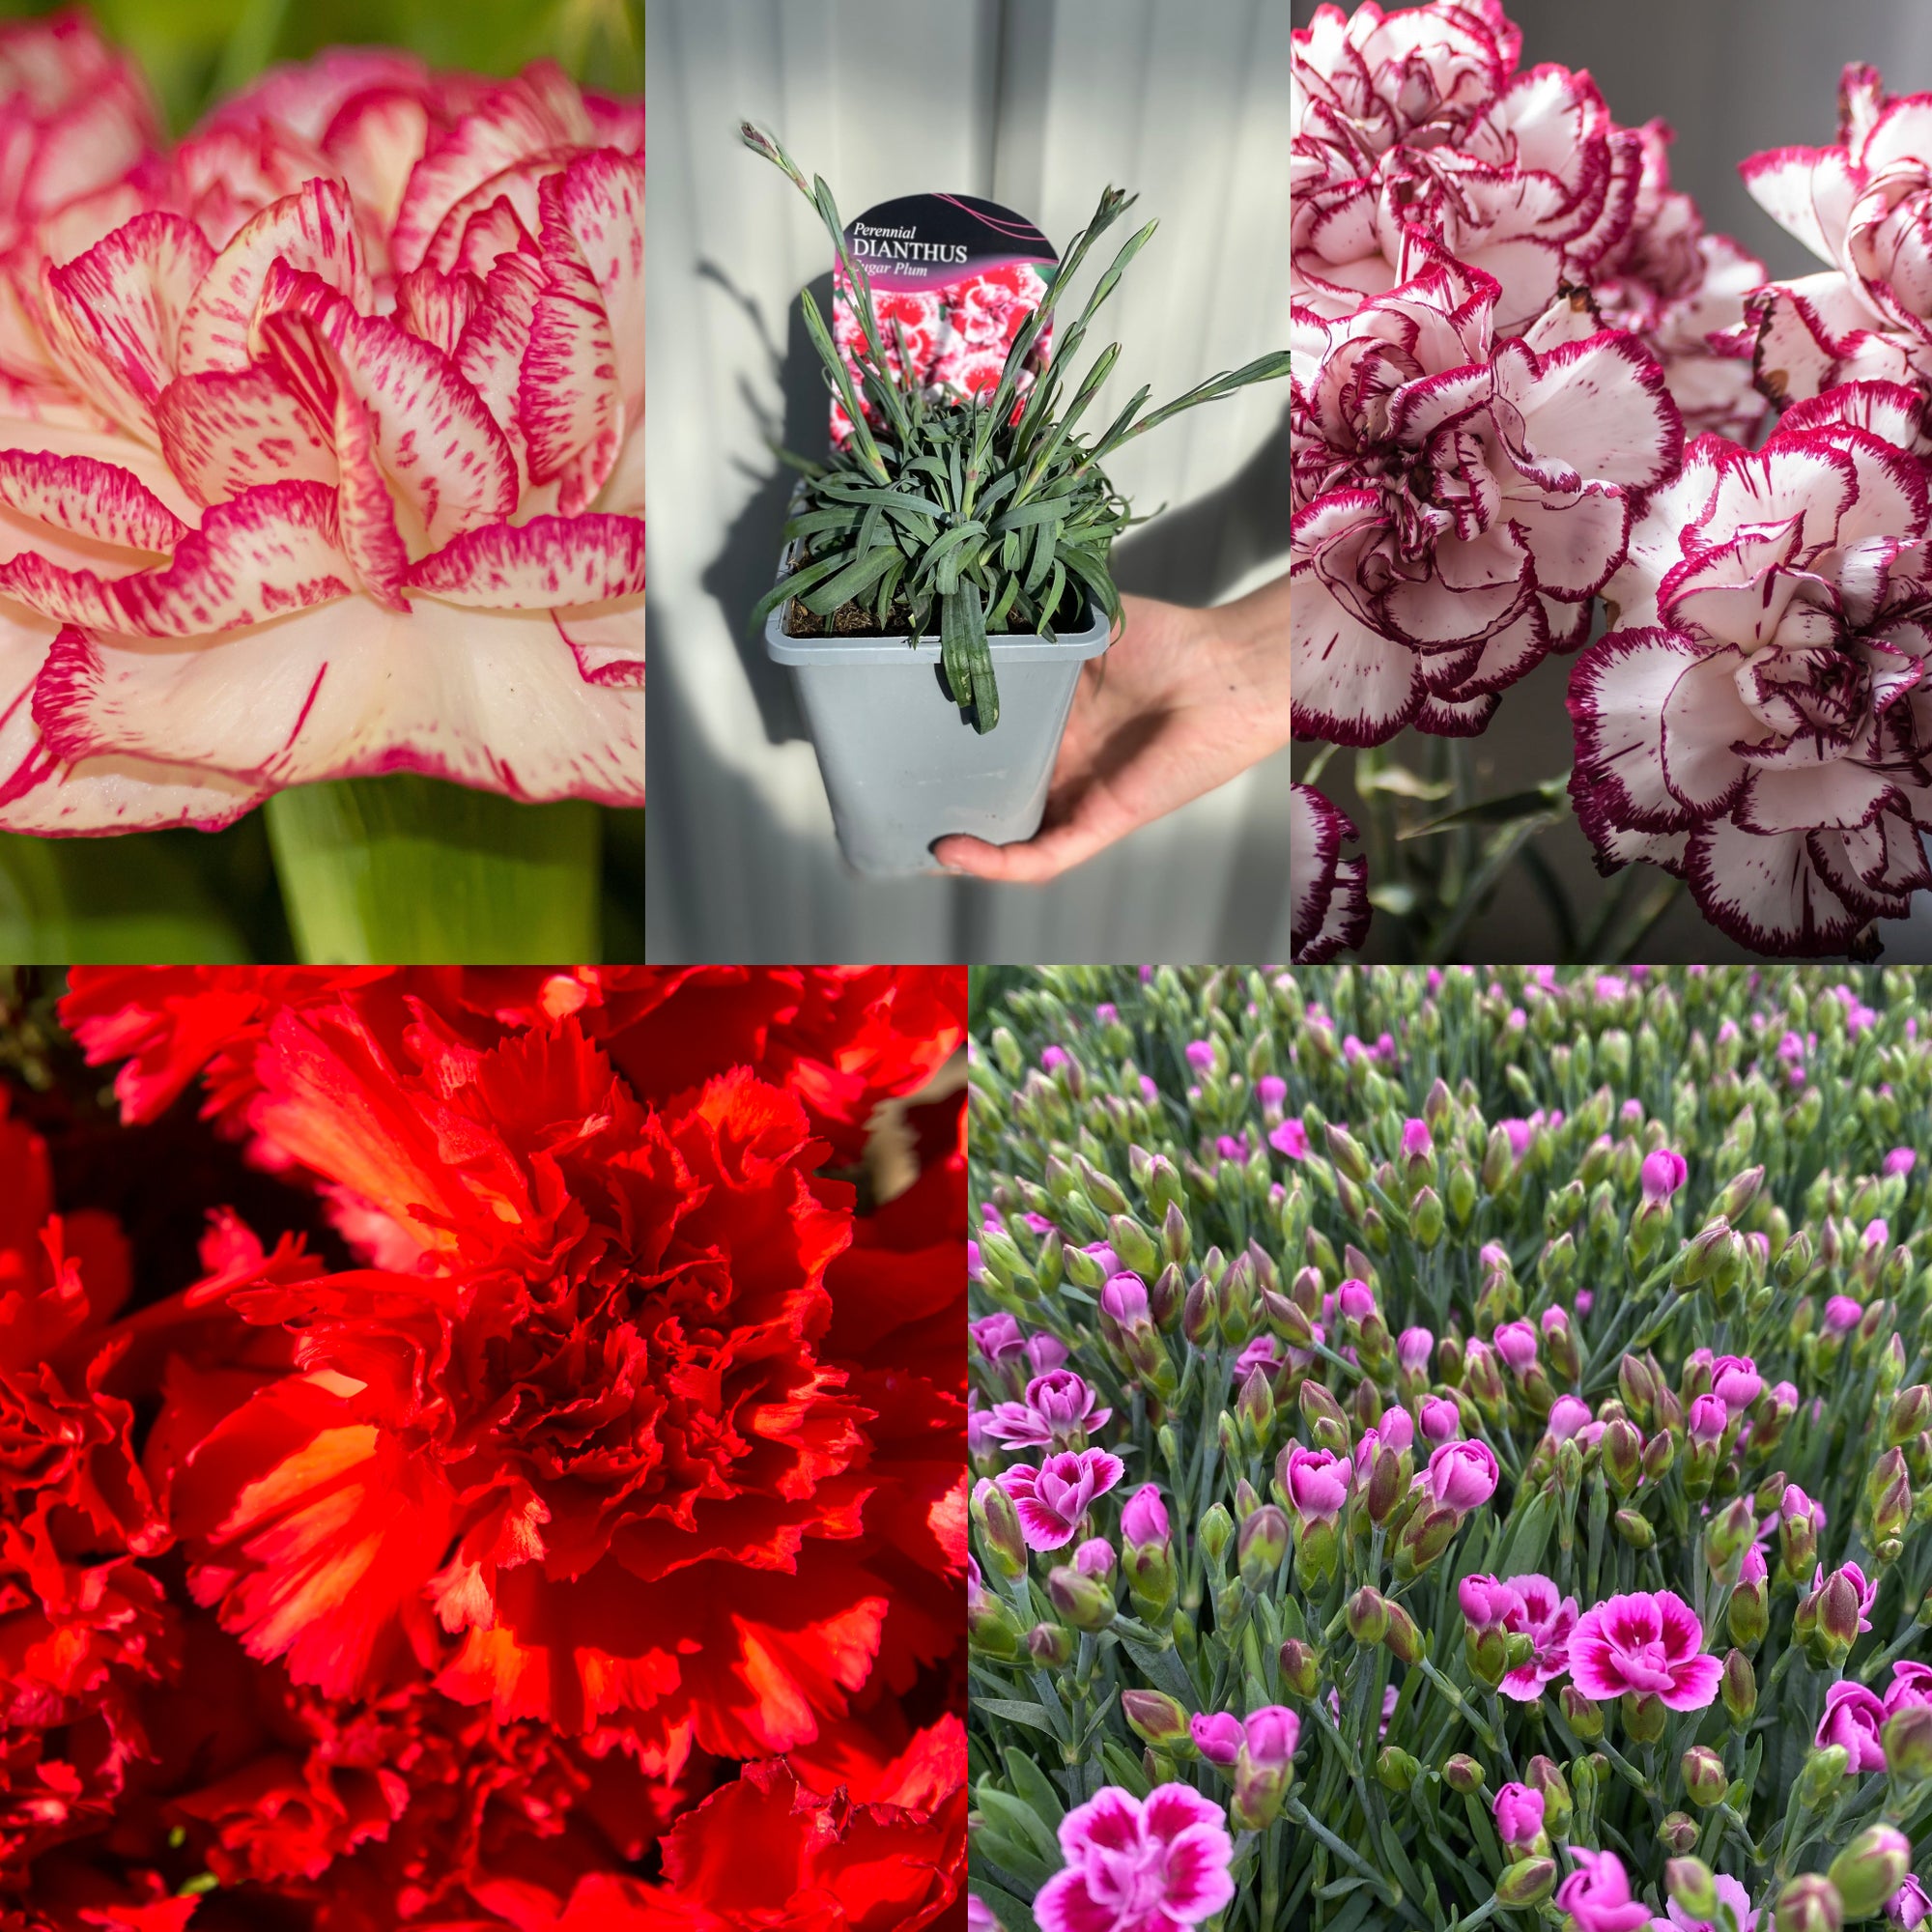 SPECIAL OFFER: Dianthus Mix of 5